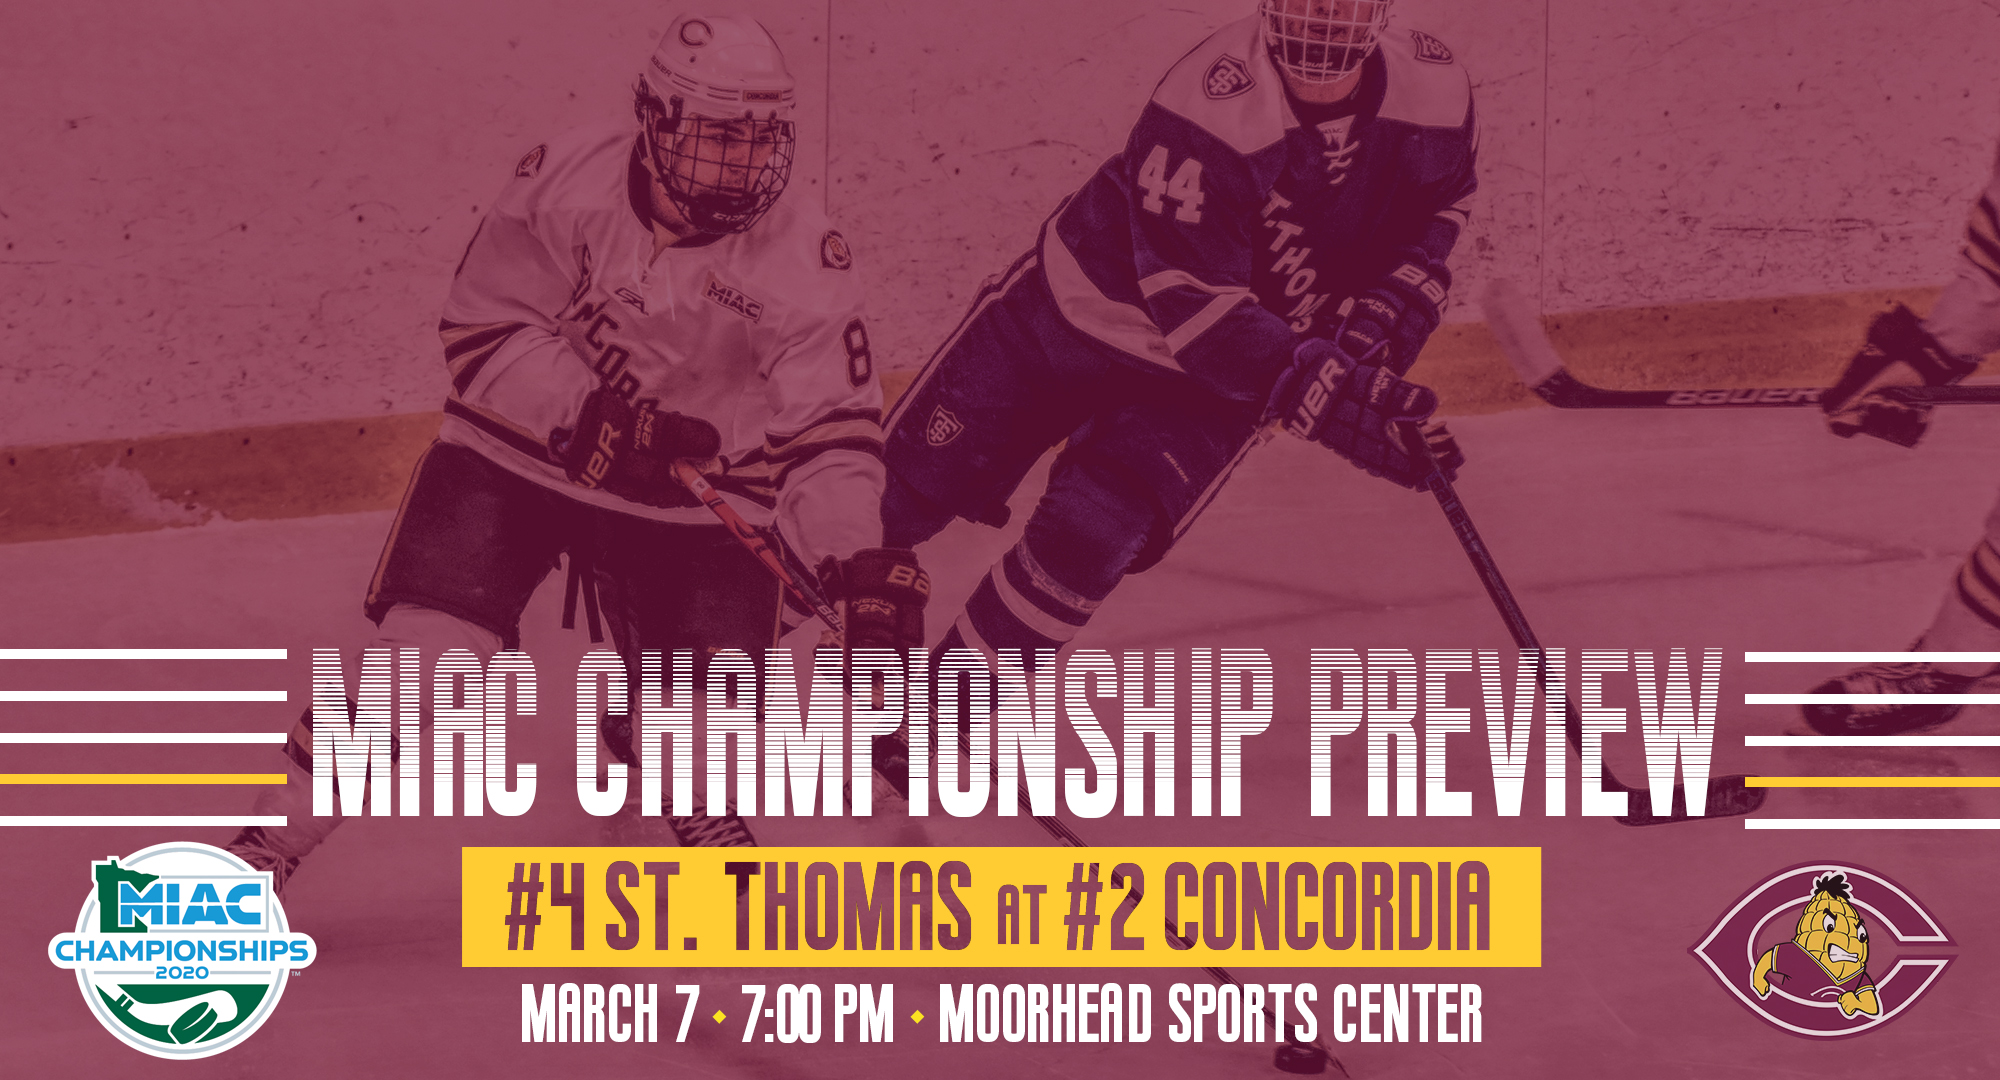 Concordia will host the MIAC Championship Game for the first time since 1987 when they play St. Thomas on Saturday, Mar. 7 at 7:00.